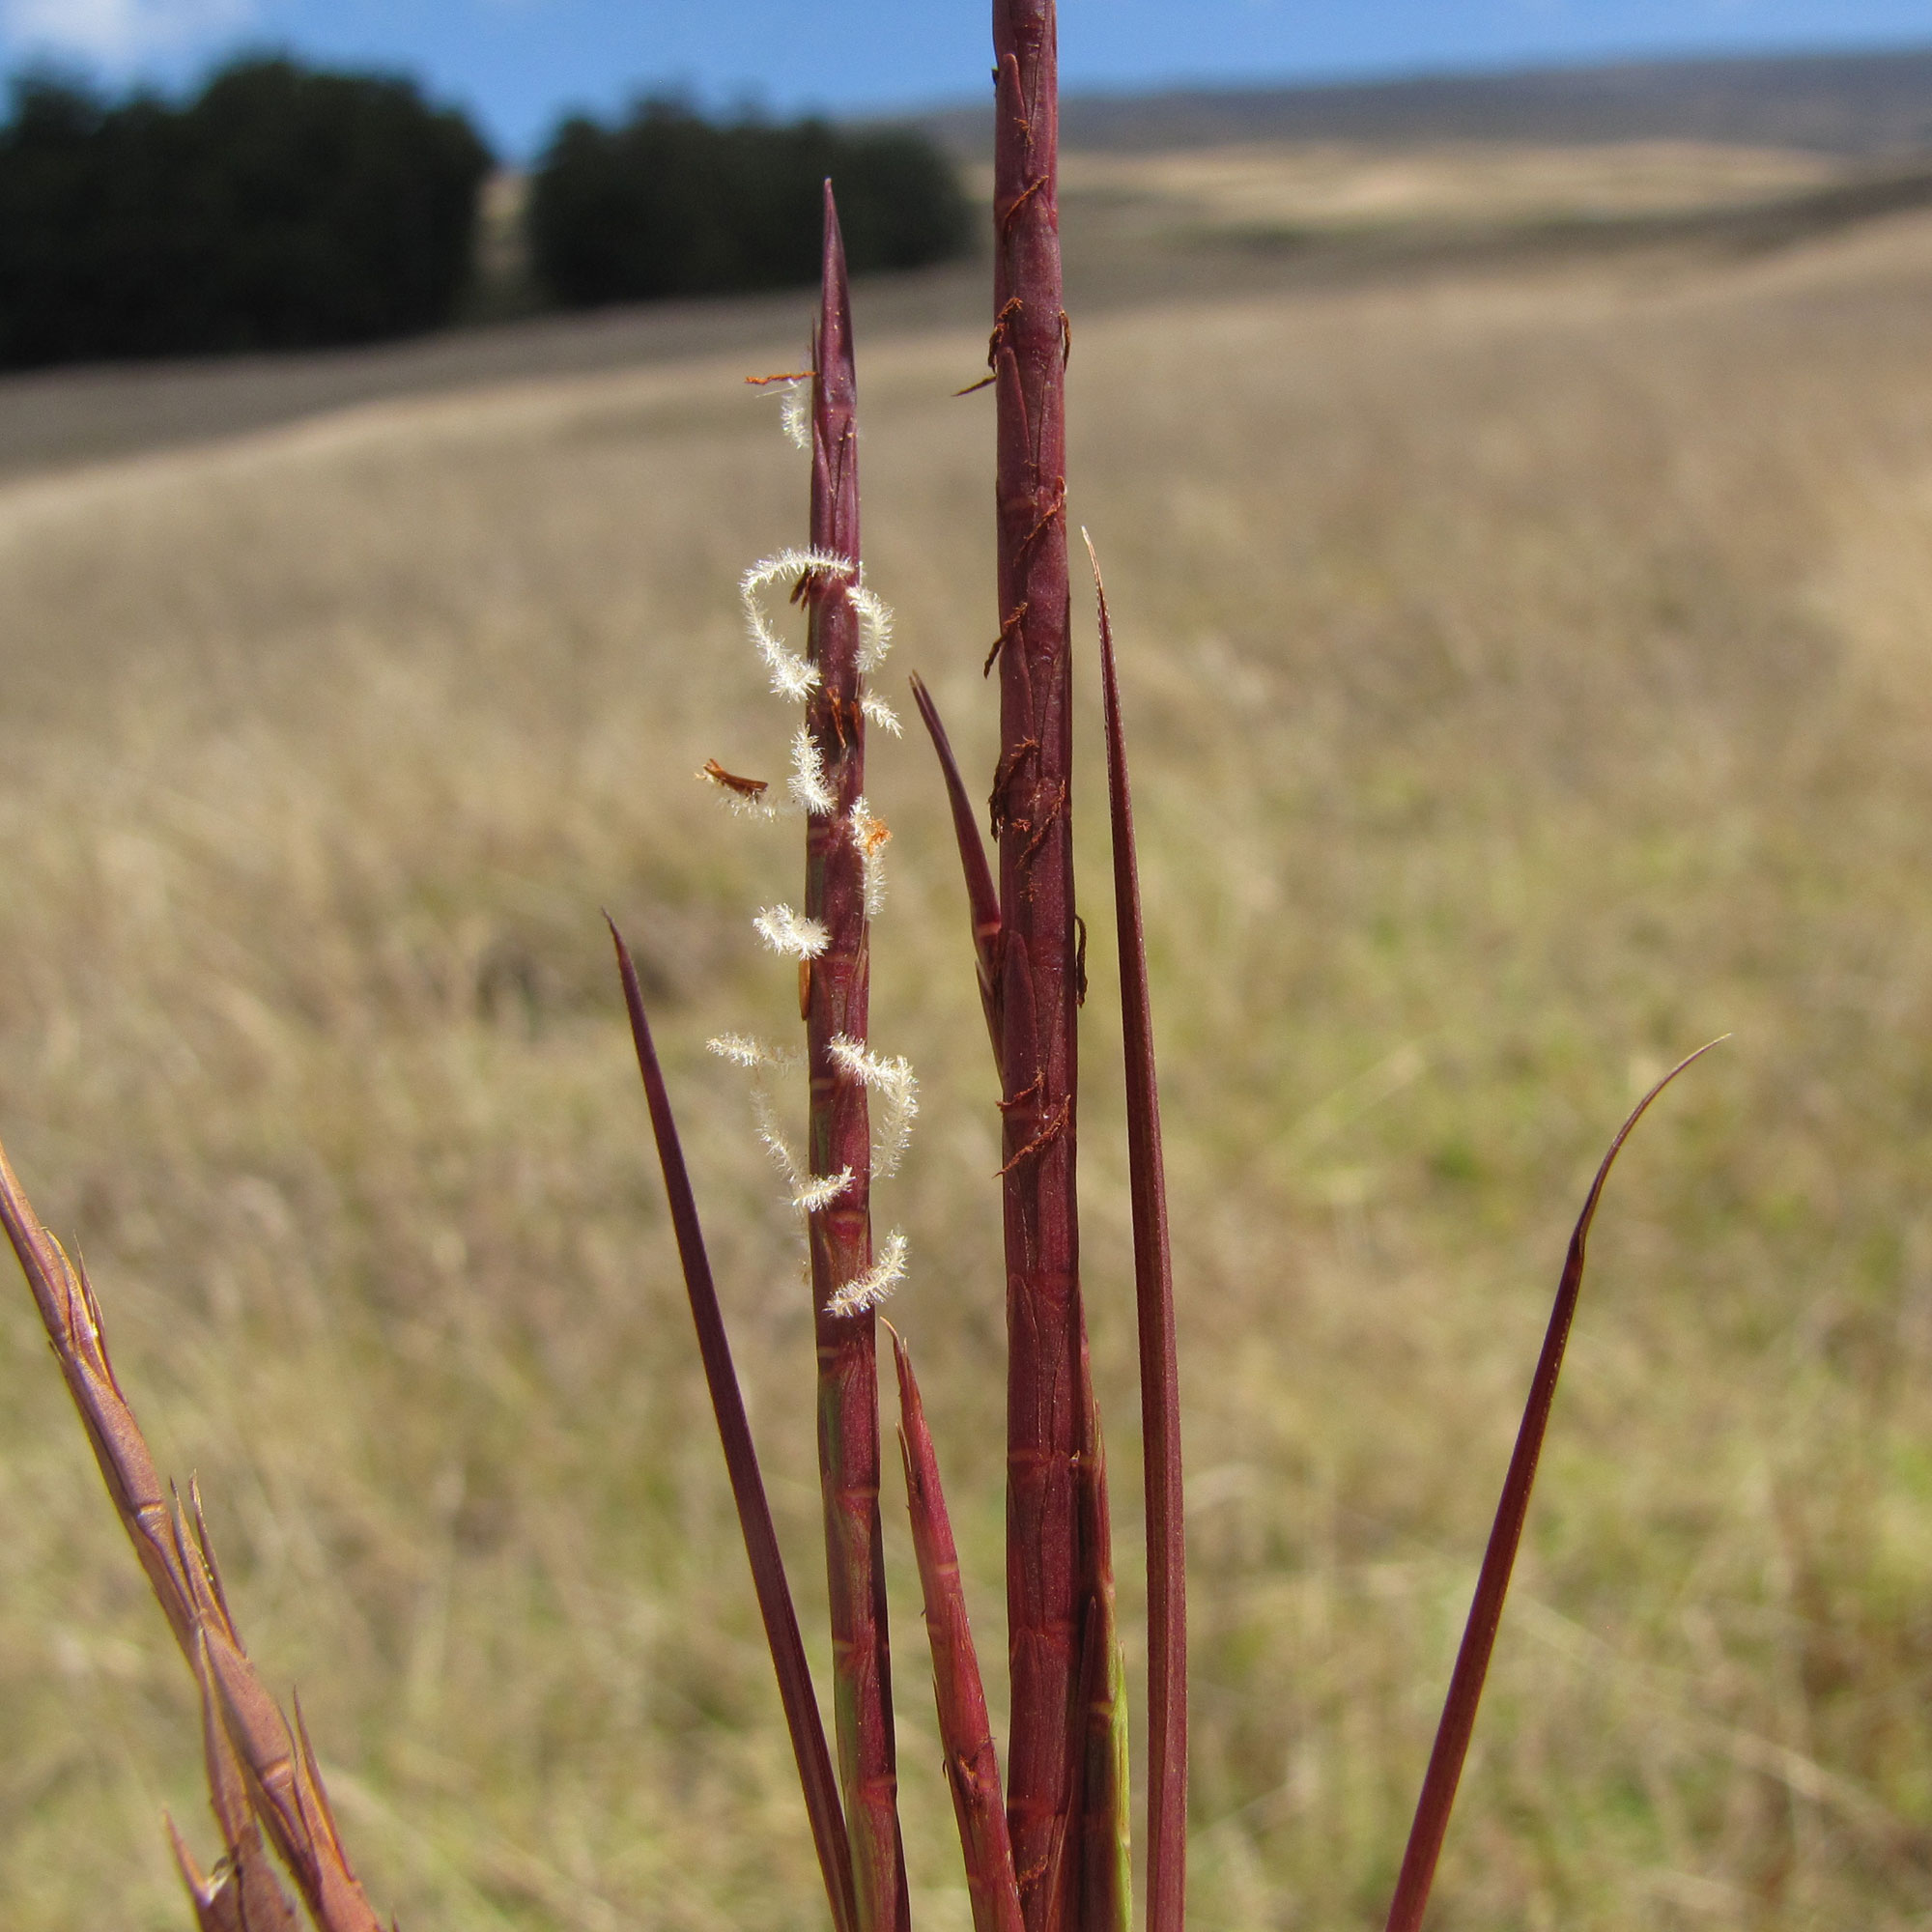 Photograph showing a close up of limpo grass spikelets in Maui, Hawaii. White, fuzzy stigma protrude from the red spikelets. 